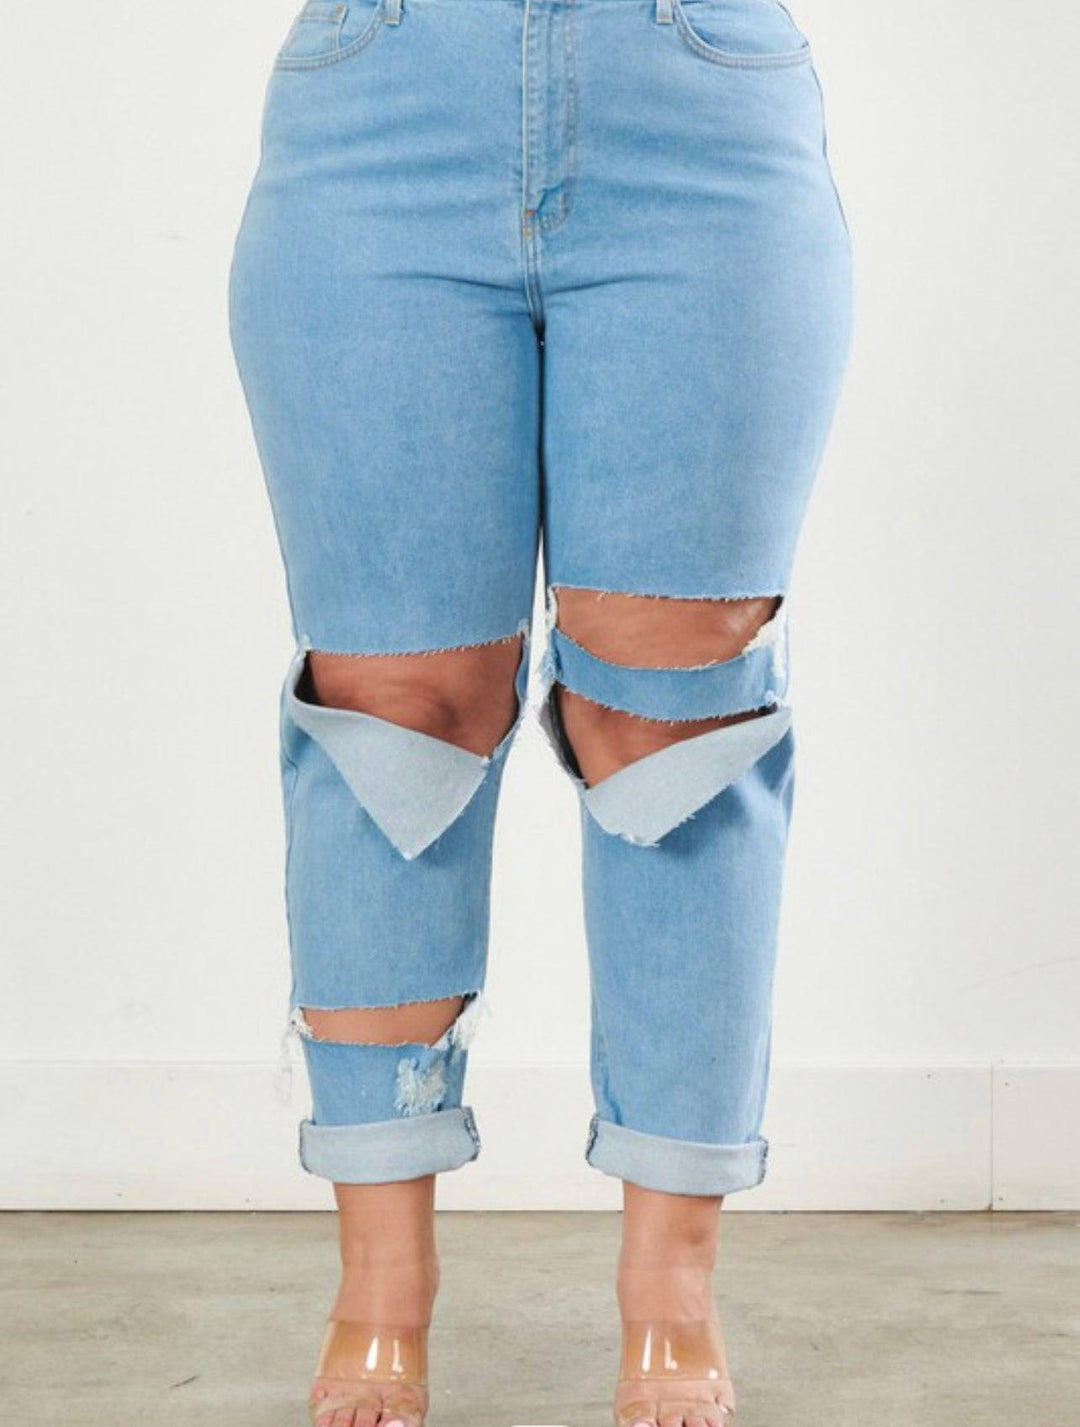 Natalia Mom Distressed Jeans - Style Baby OMG Fashion Boutique - Stylebabyomg - Buy - Aesthetic Baddie Outfits - Babyboo - OOTD - Shie 